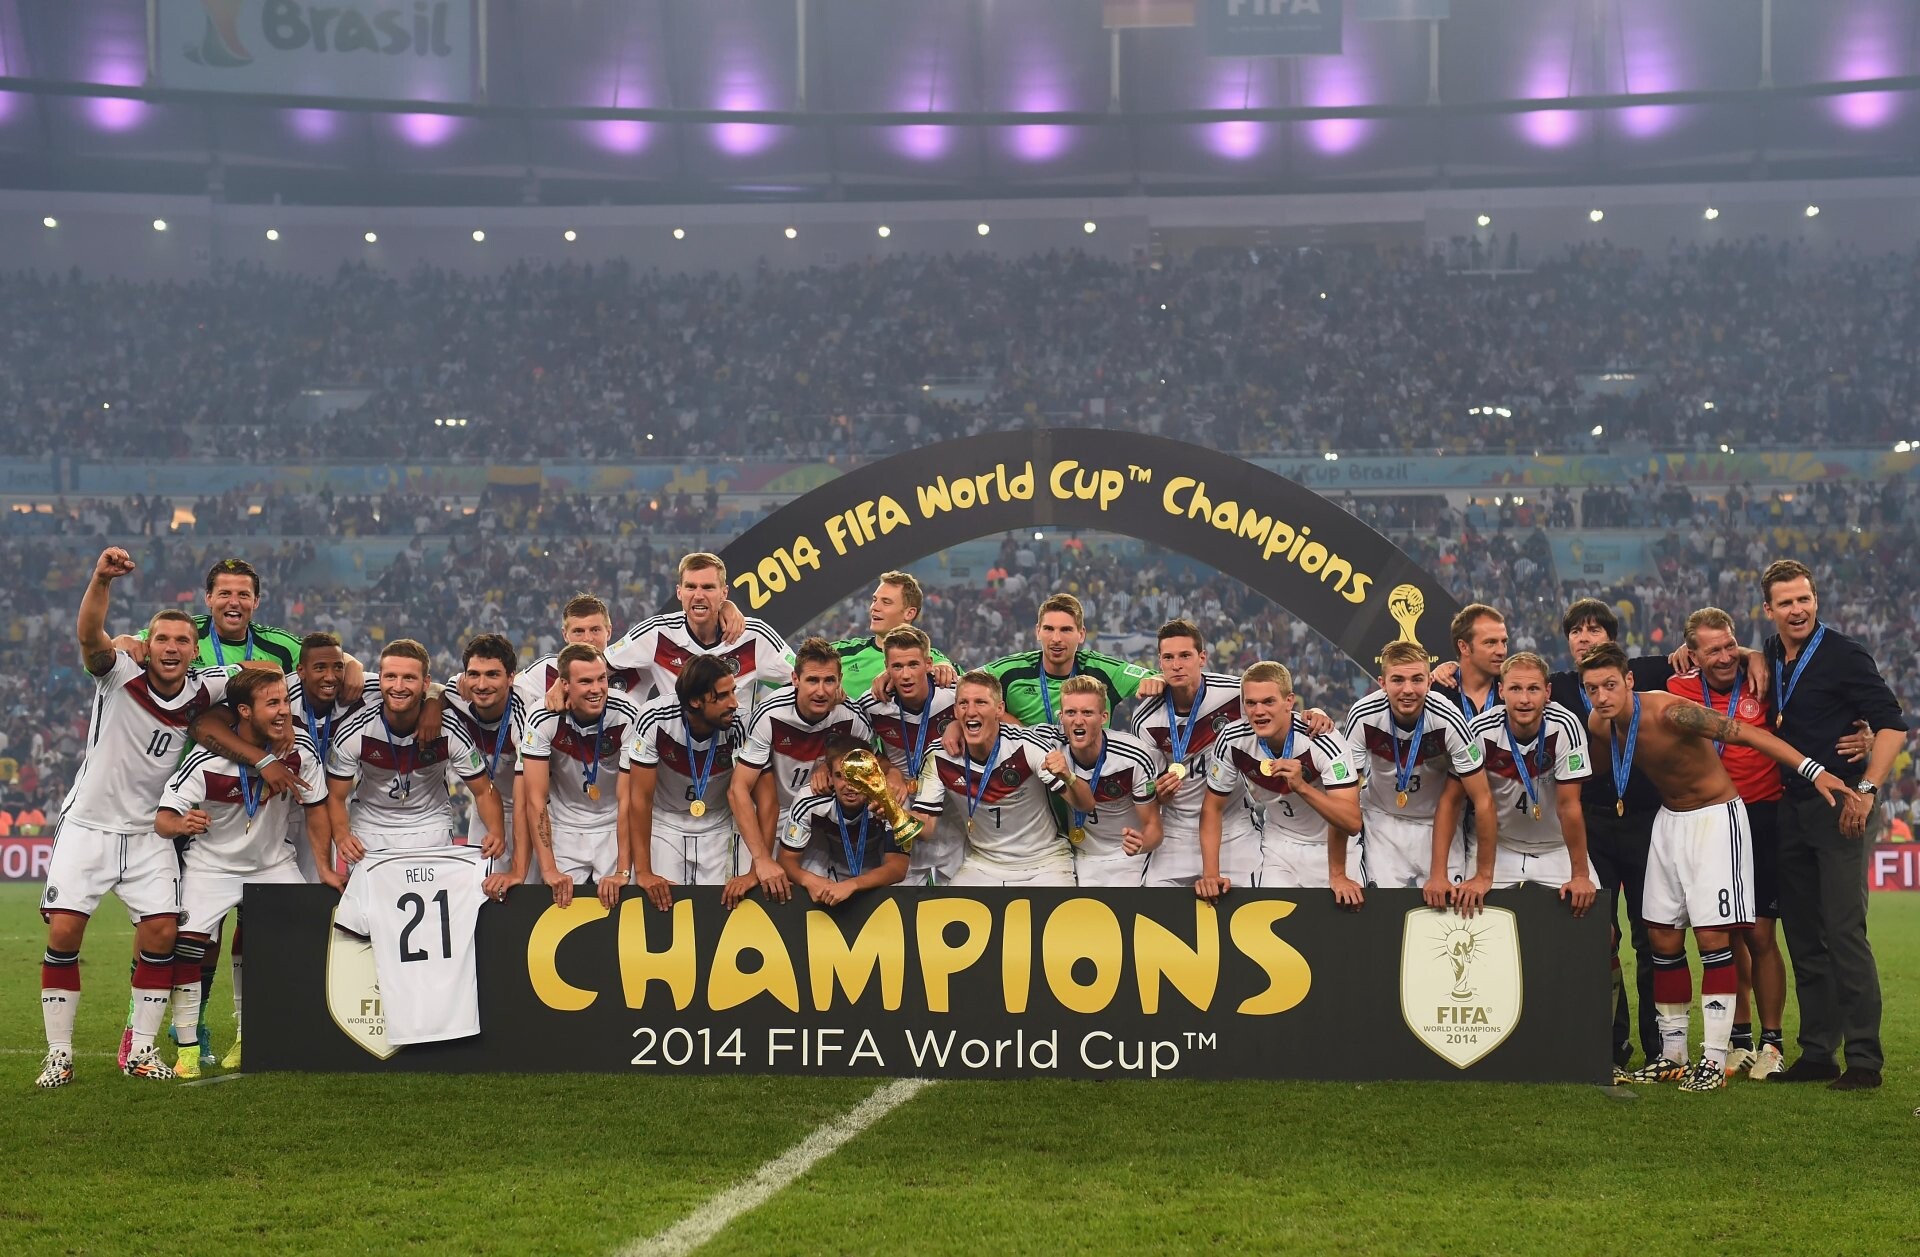 Germany Soccer Team: FIFA 2014 World Cup Champions, Celebration after the match against Argentina, Mario Gotze. 1920x1260 HD Wallpaper.